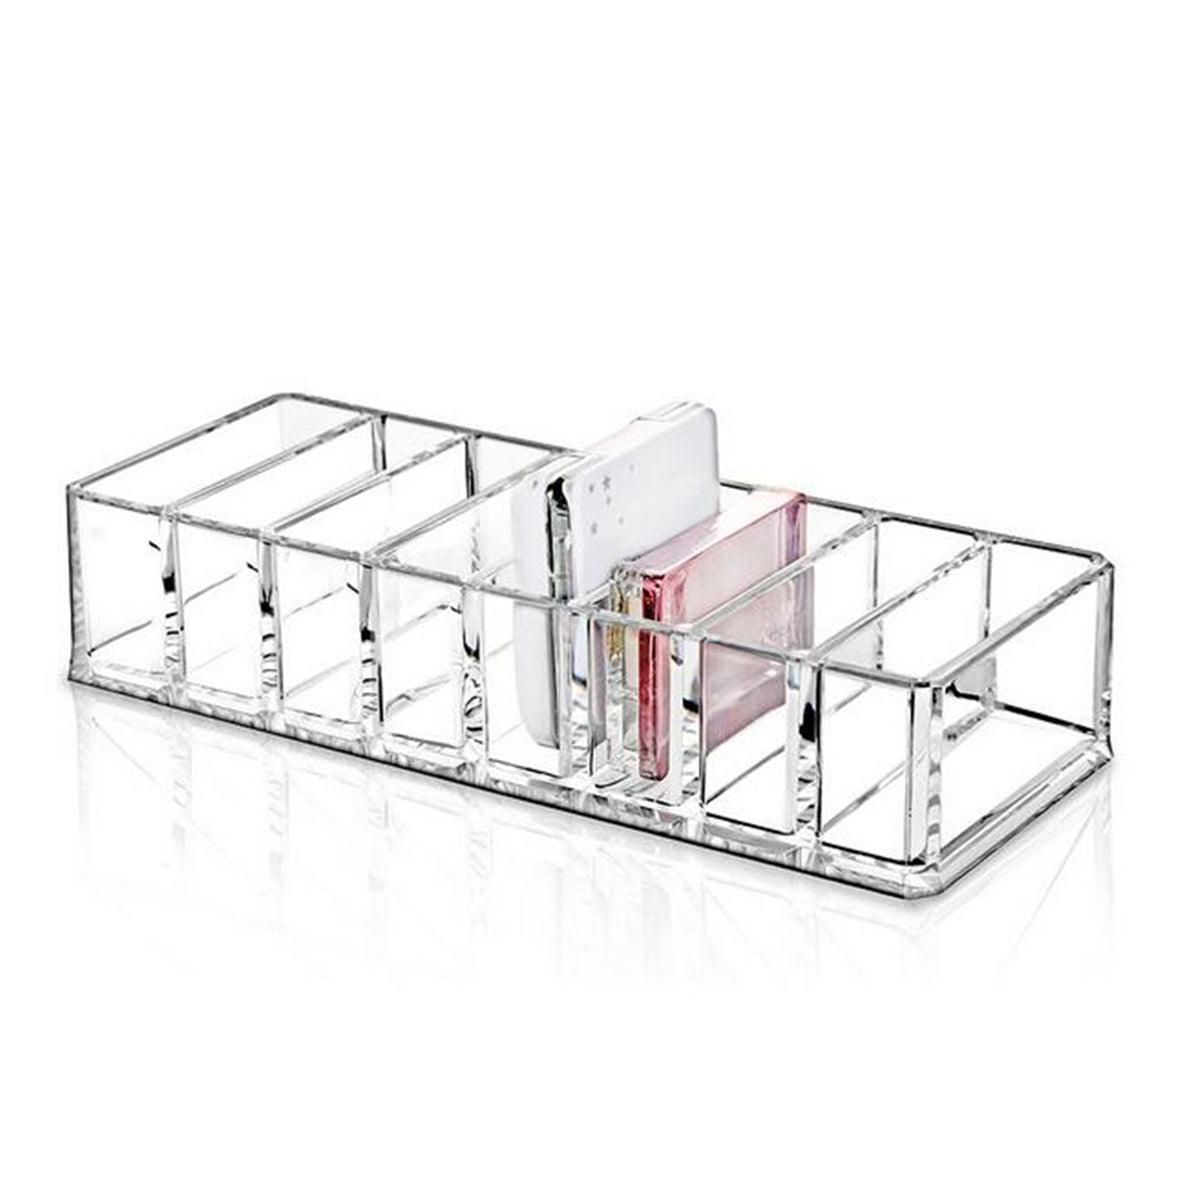 Acrylic Compact Holder - Keep Your Makeup Organized and Easily Accessible selling at £12.69
nseimports.co.uk/products/acryl…
#nseimports